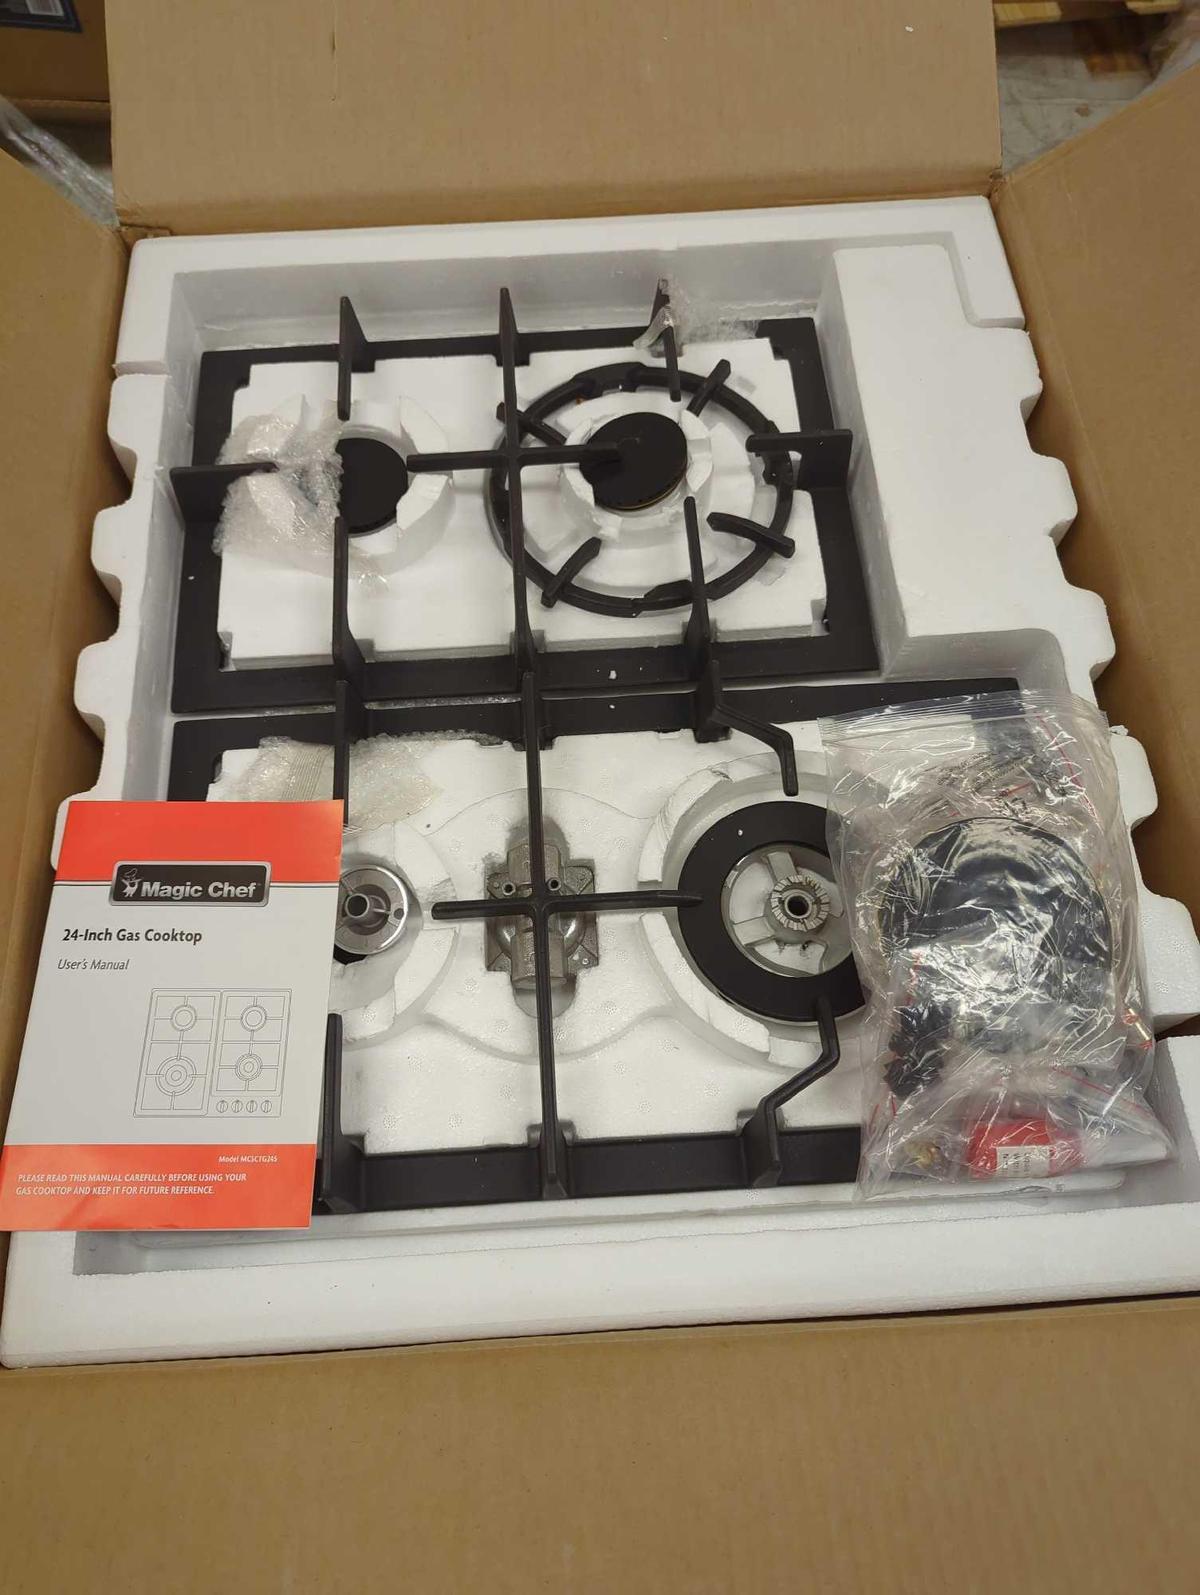 Magic Chef 24 in. Gas Cooktop in Stainless Steel with 4 Burners. SKU # 1002650332 Retails as $329.87